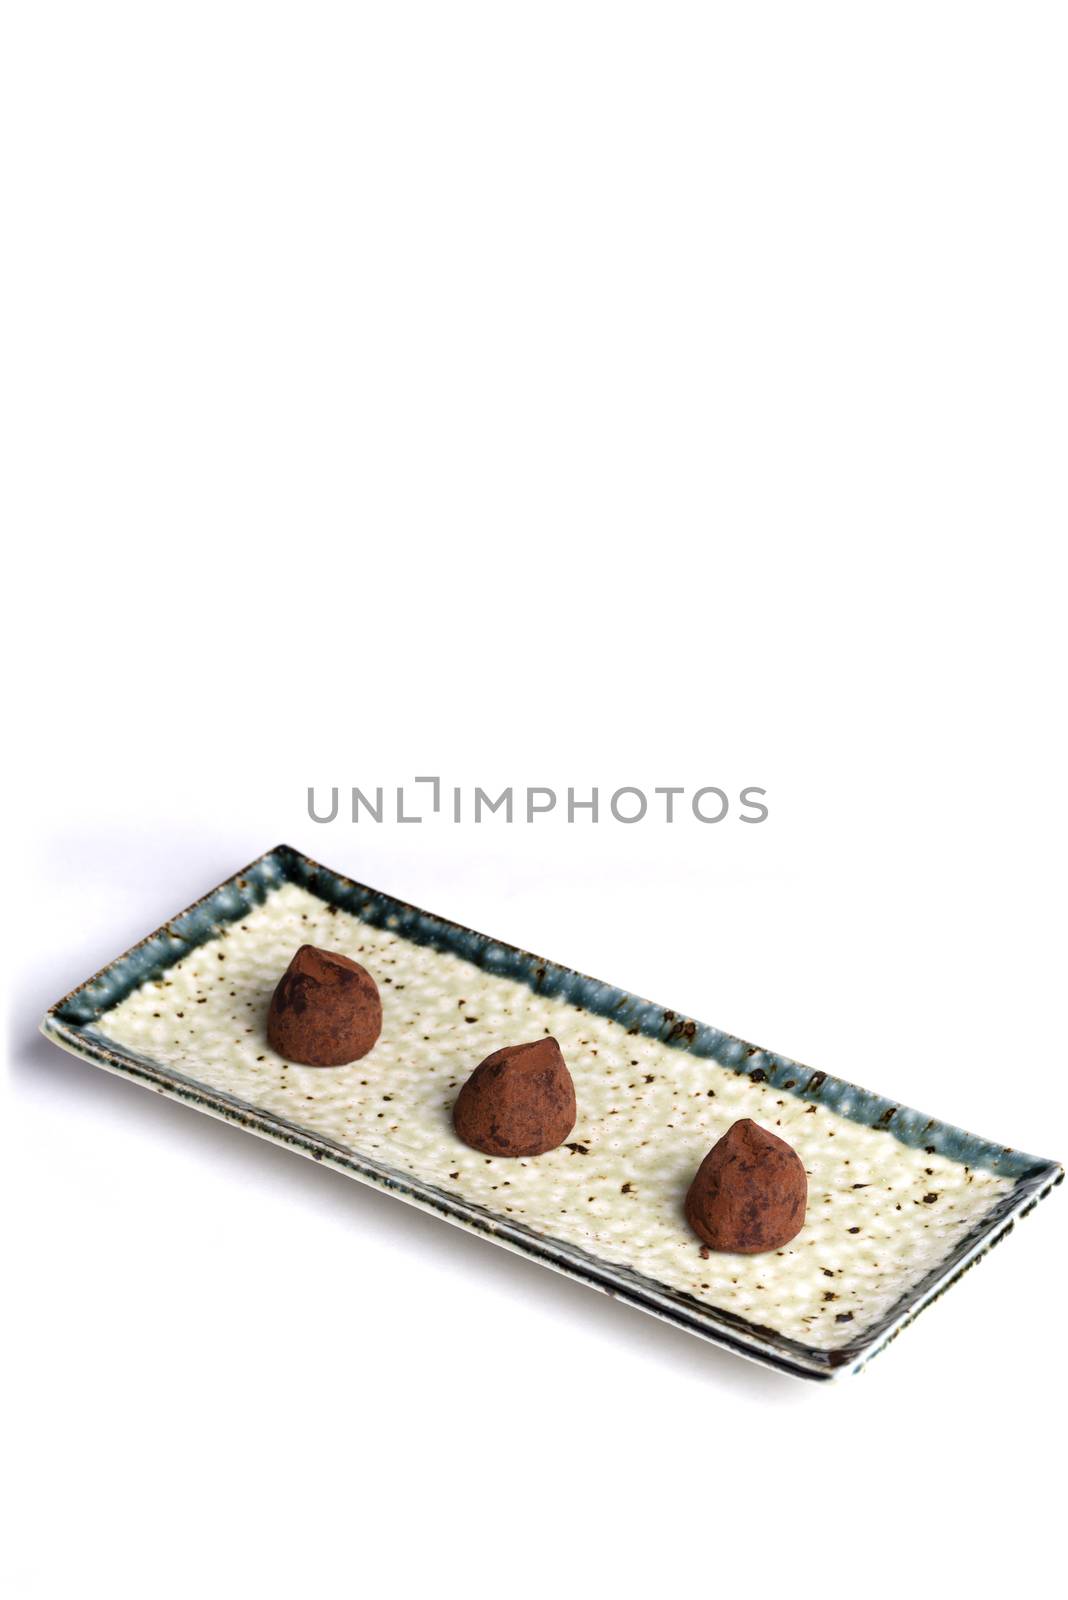 Three chocolate truffles on a ceramic plate with a pure white background.